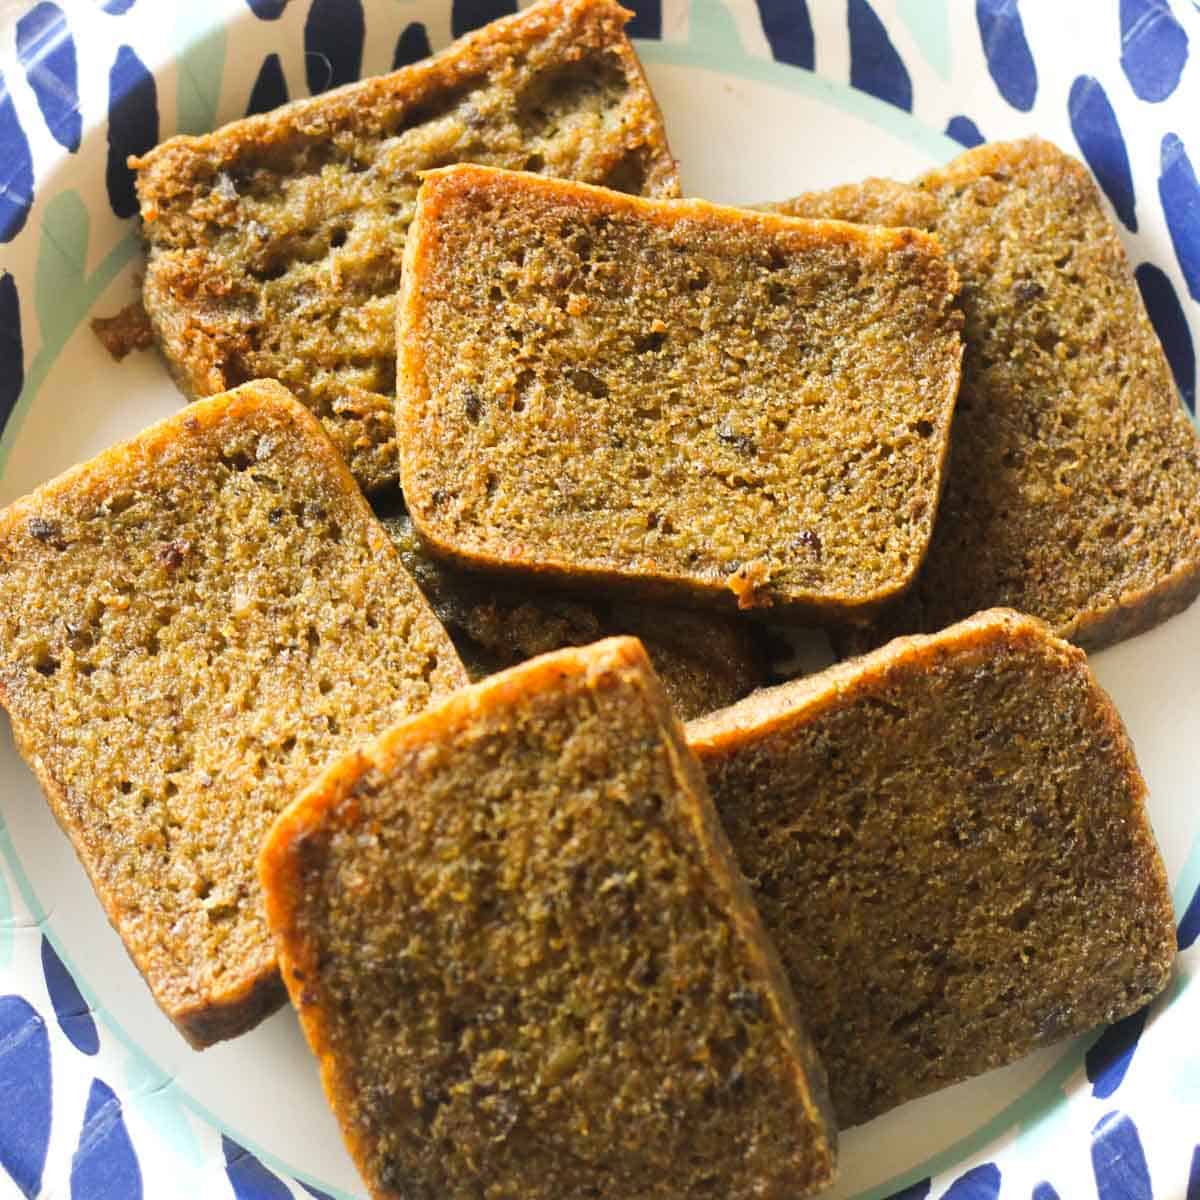 sliced scrapple on the plate